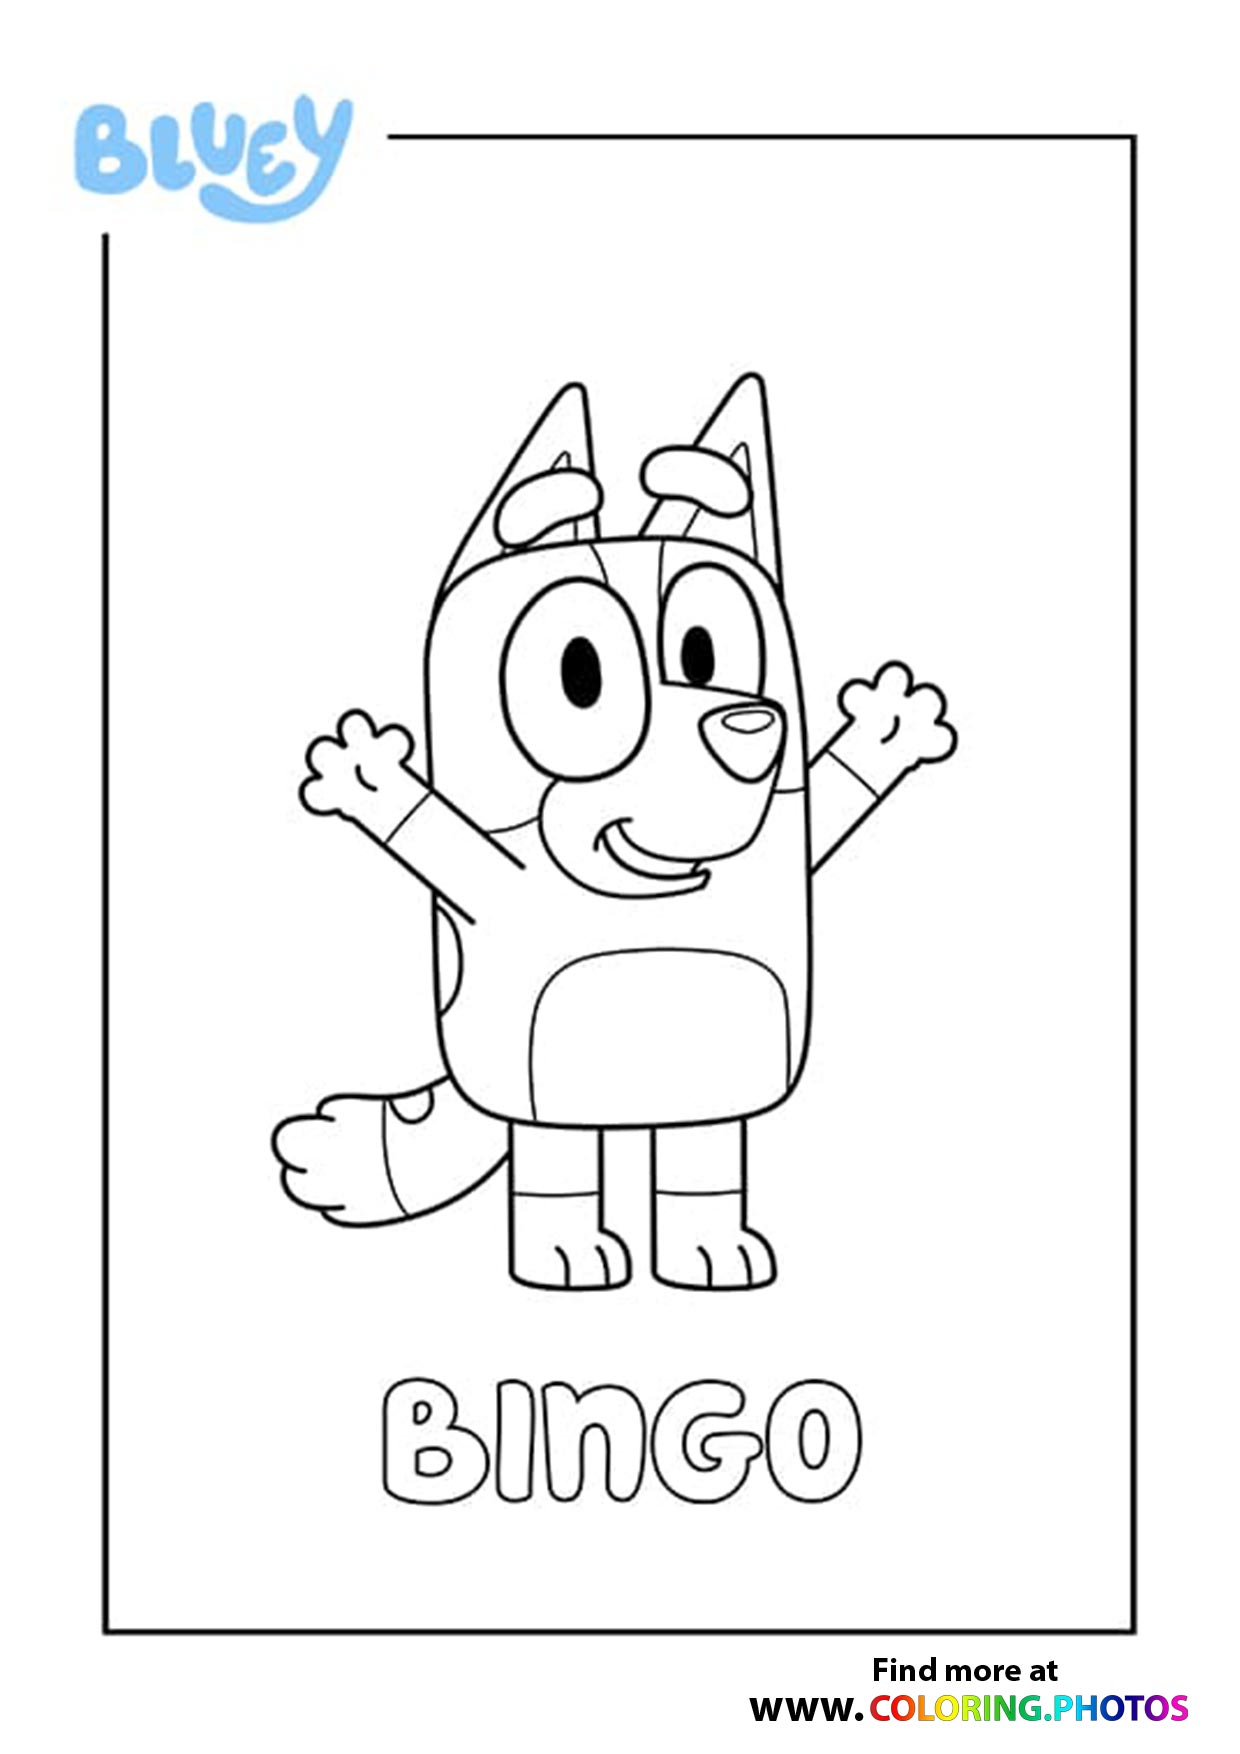 bluey-coloring-pages-printable